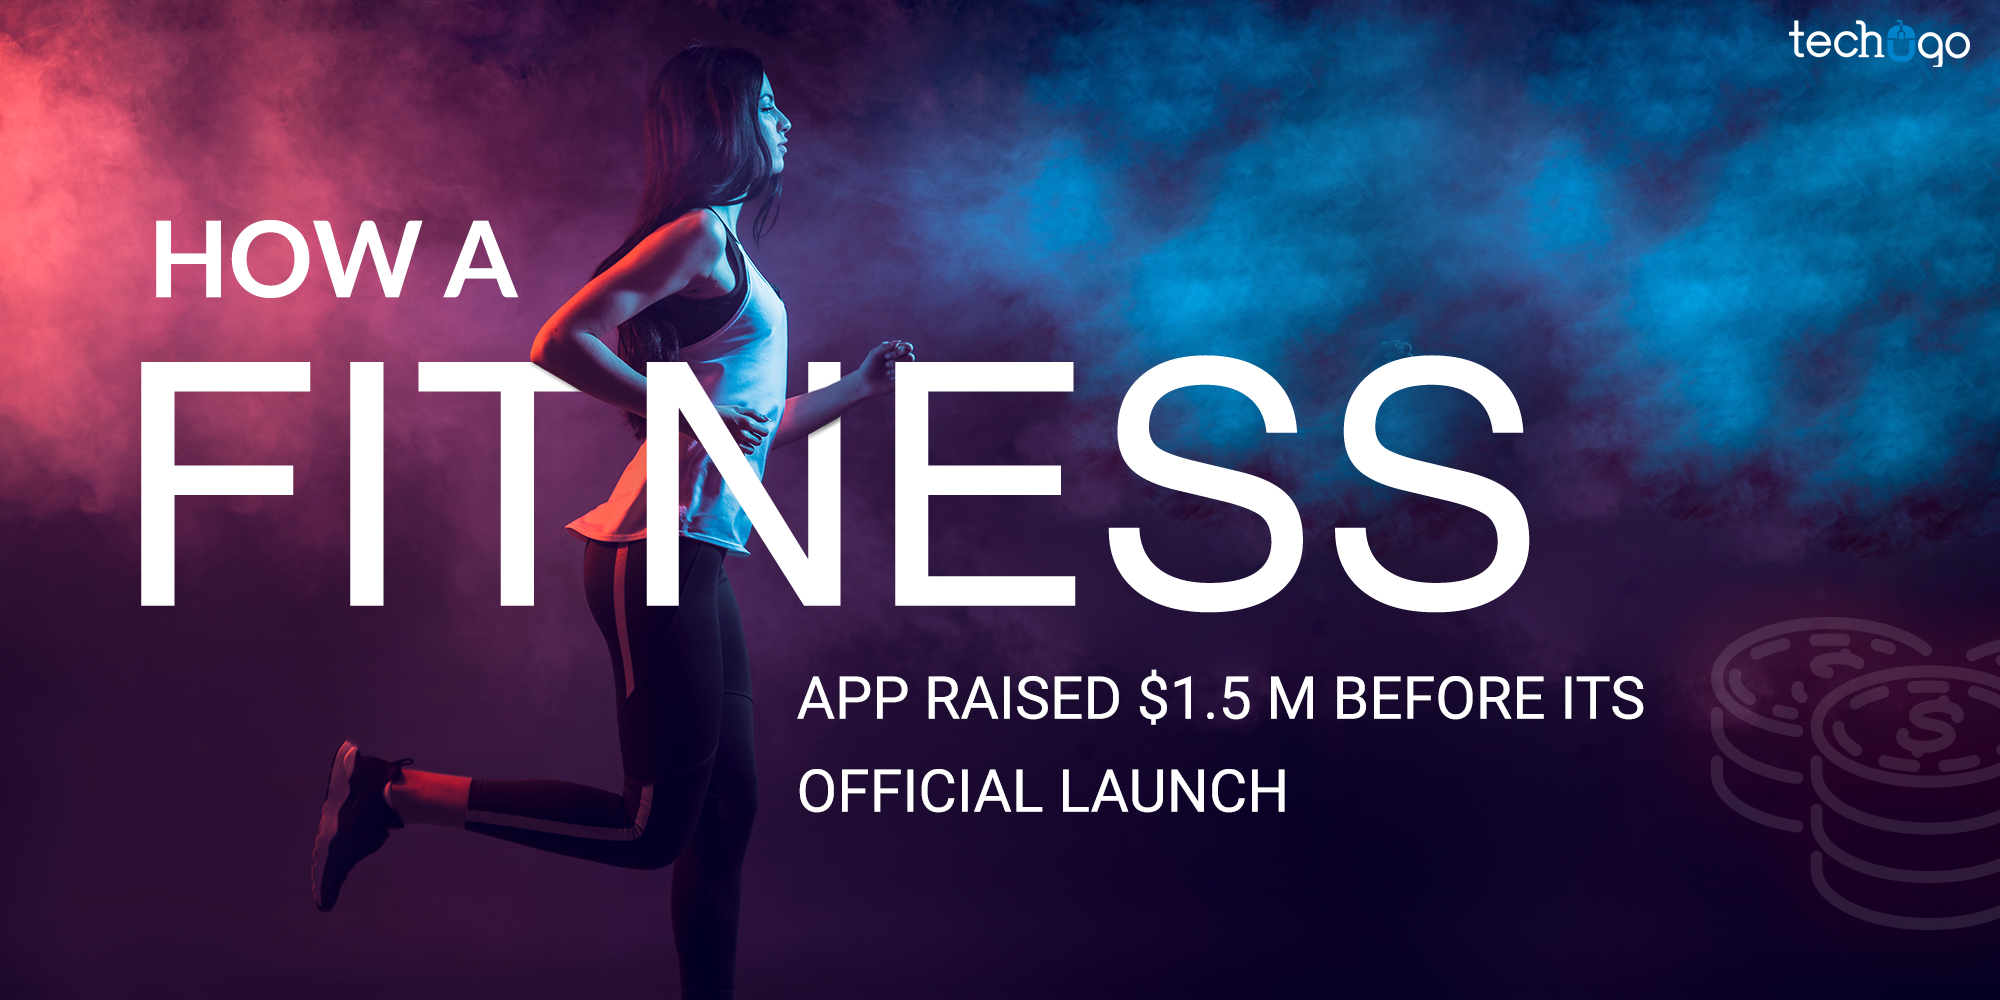 How A Fitness App Raised $1.5 M Before Its Official Launch